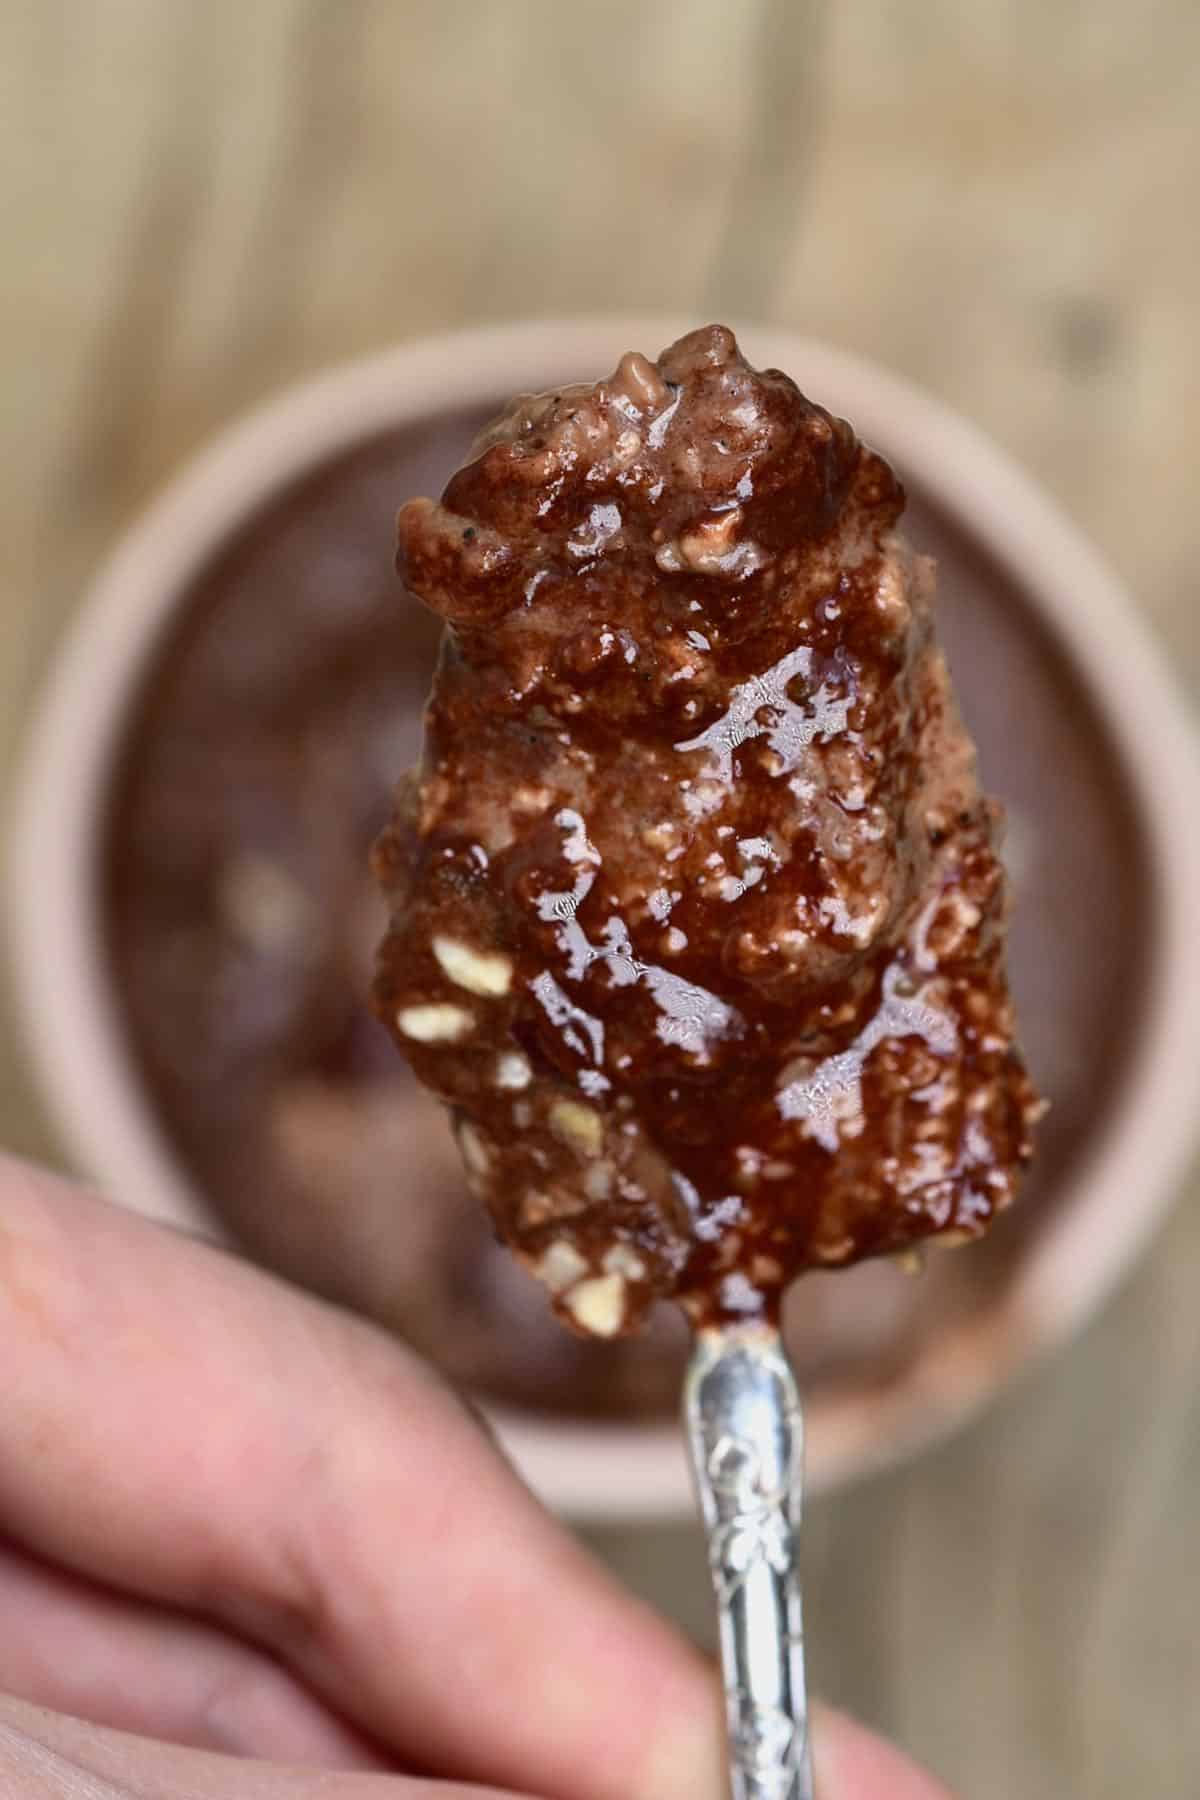 A spoonful of baked chocolate oats